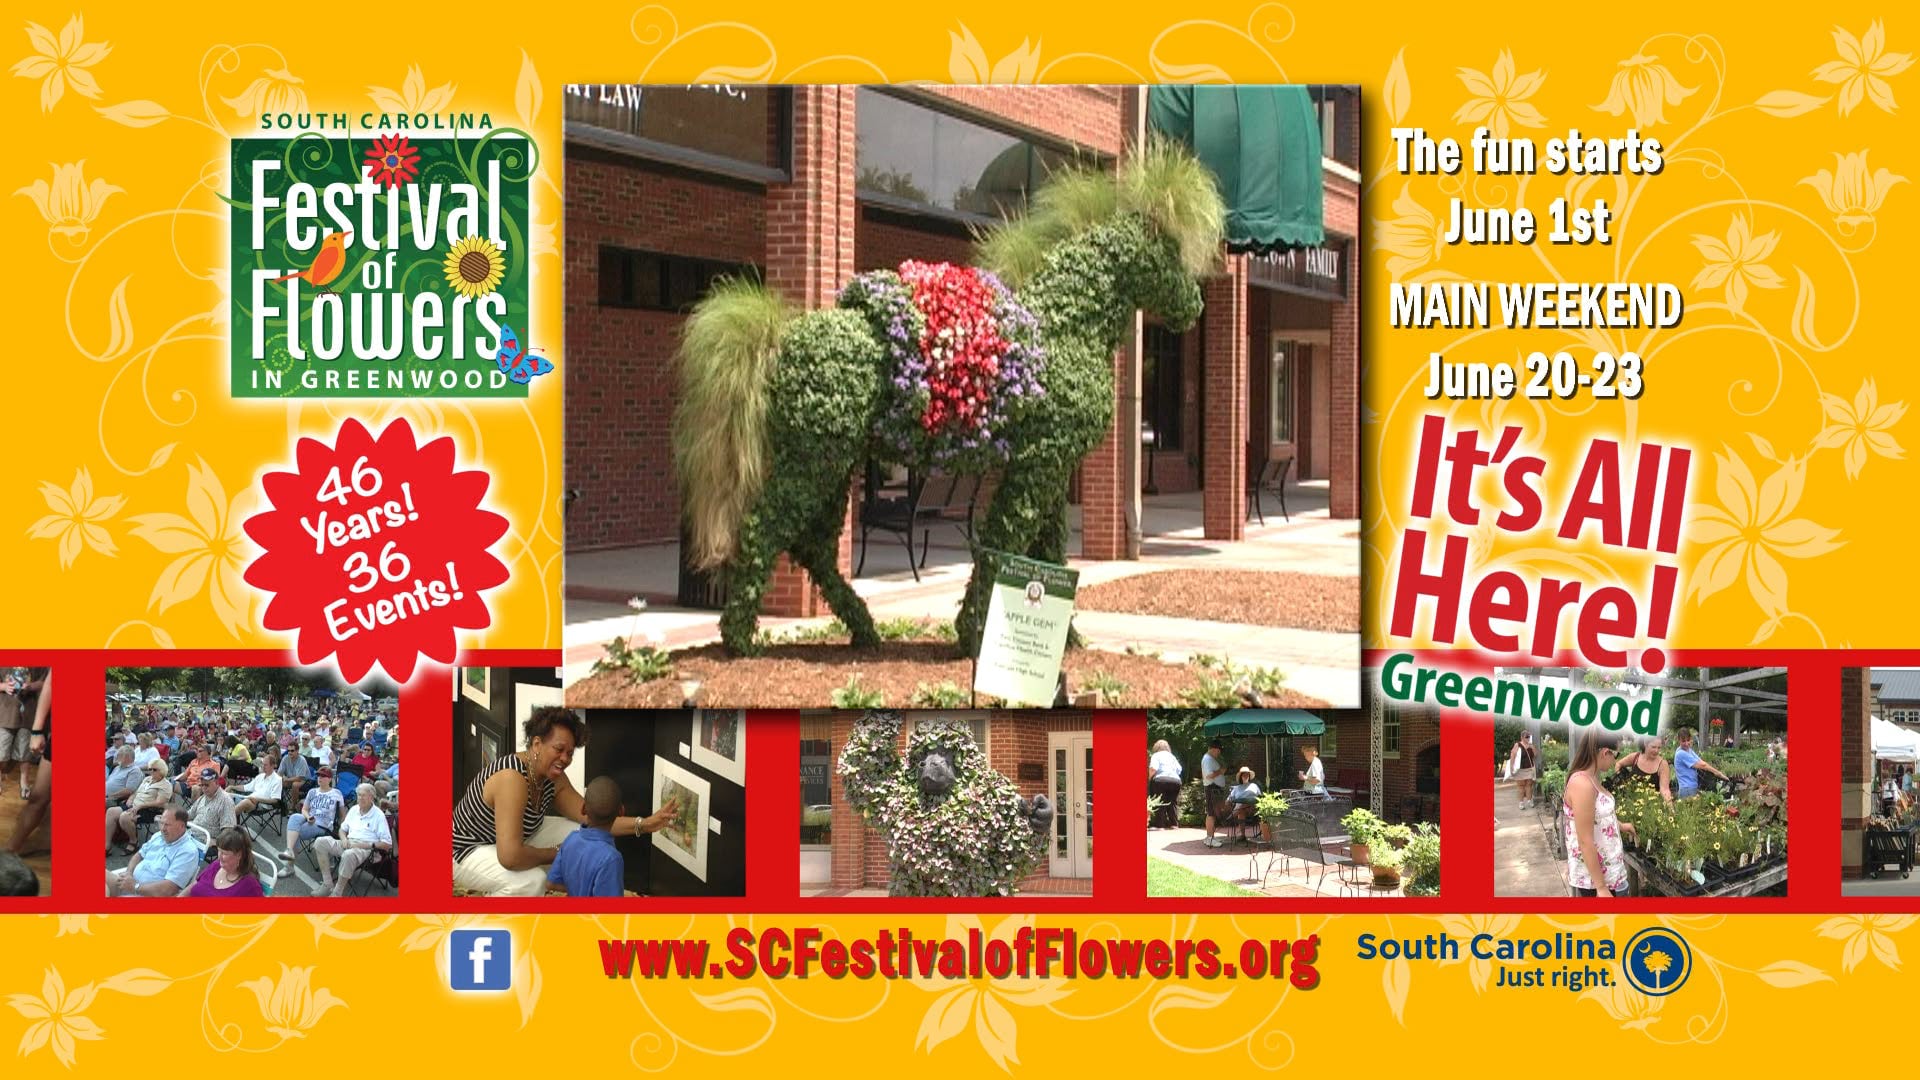 46th Annual South Carolina Festival of Flowers in Greenwood, SC